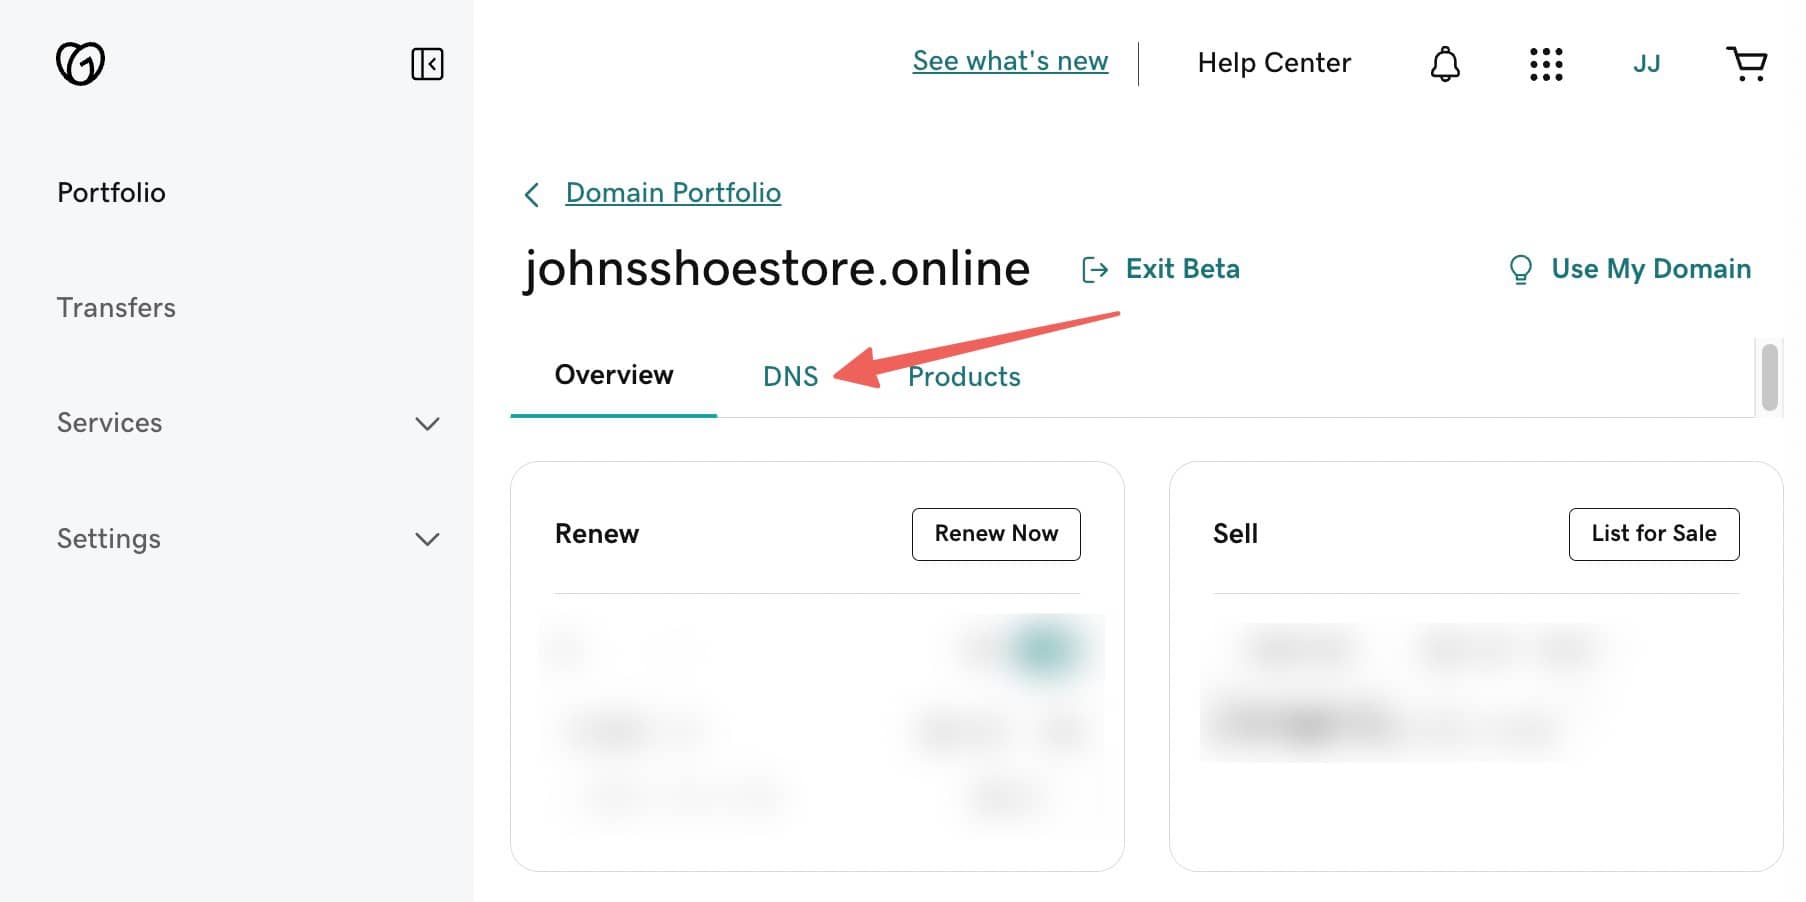 How to create subdomain in GoDaddy: Johnsshoestore.online area with a red arrow pointing to "DNS" option under the domain.